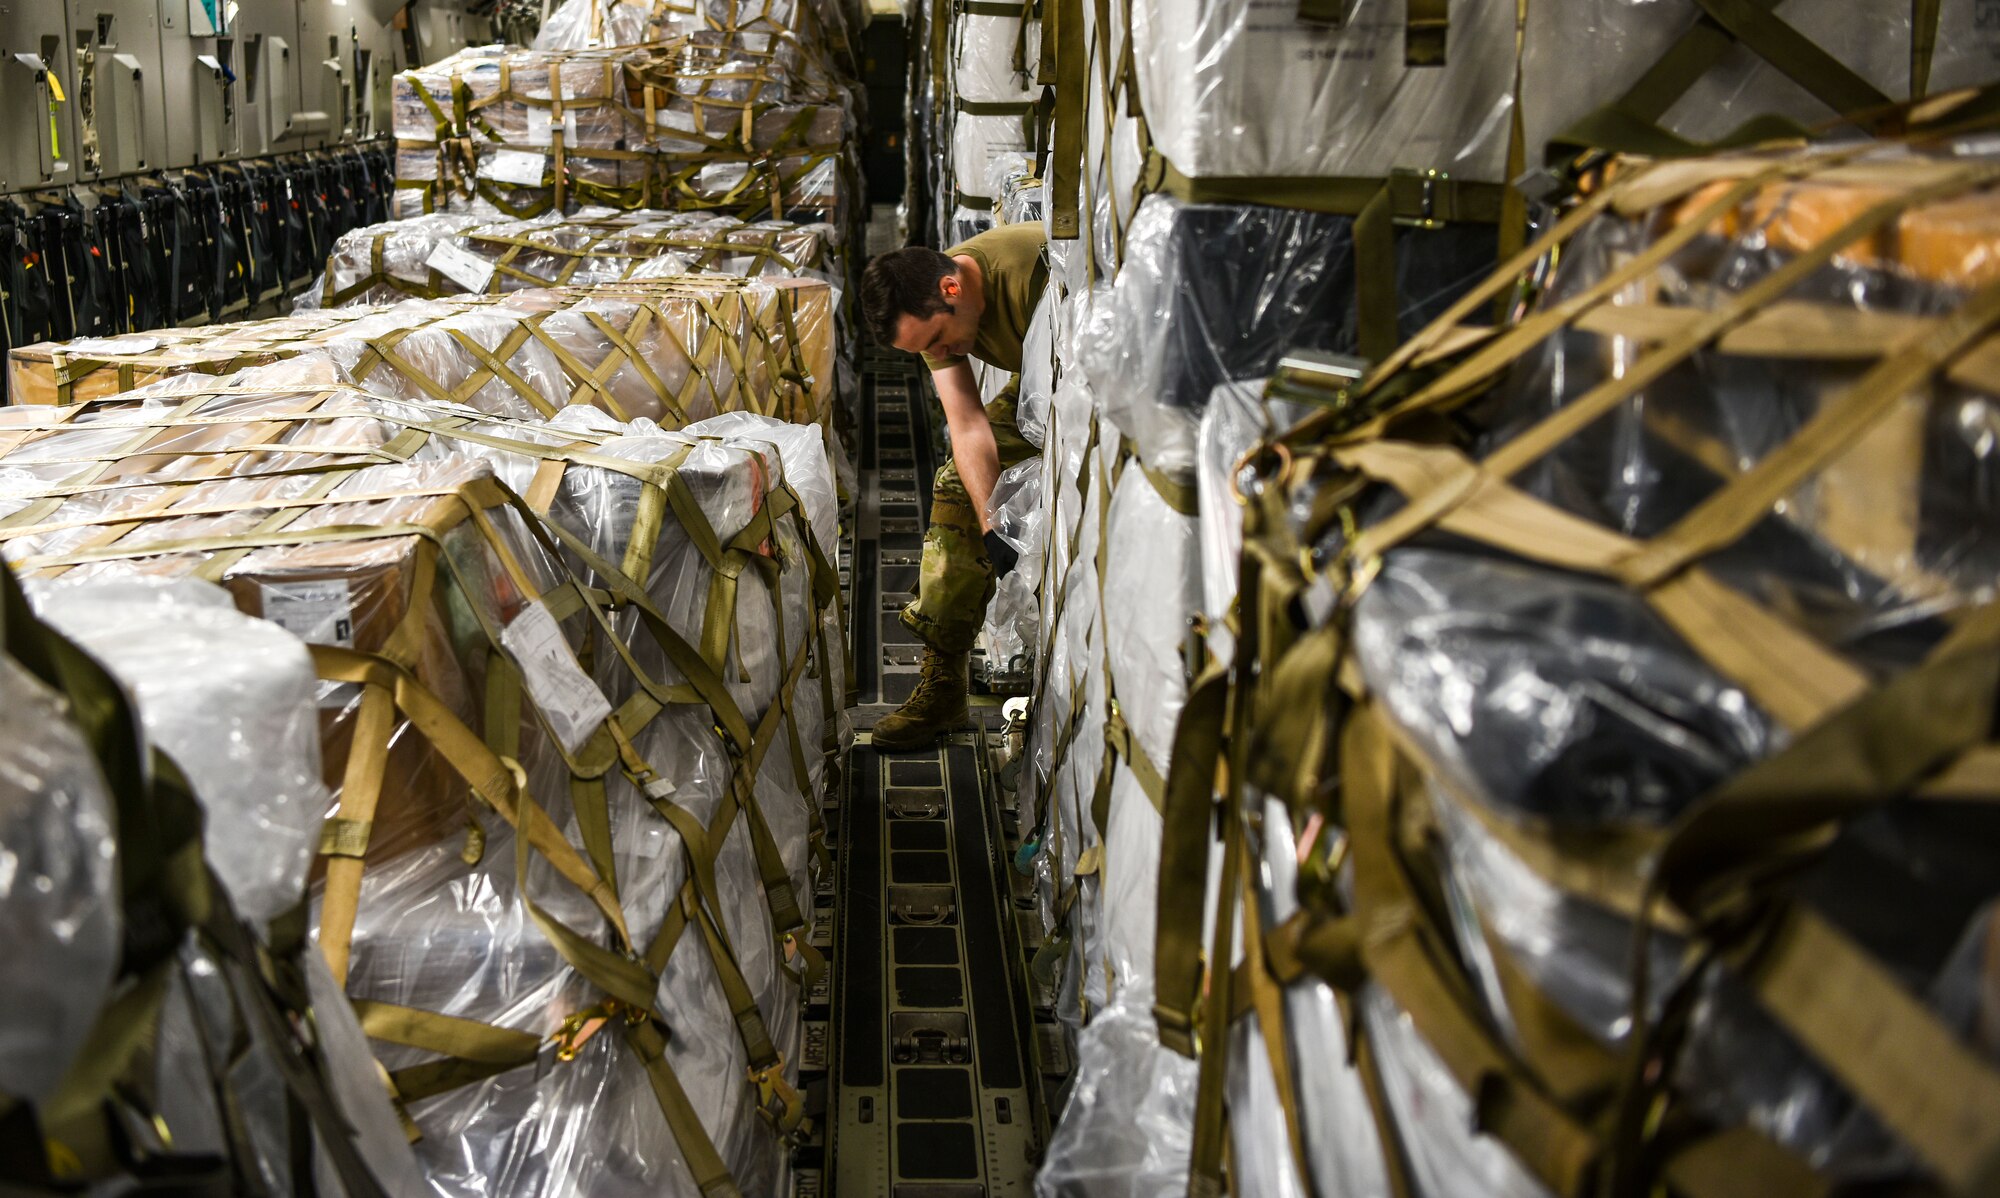 U.S. Air Force Staff Sgt. Charles Brown, 735th Air Mobility Squadron Aircraft services supervisor, inspects pallet placement on a C-17 Globemaster III from the 535th Airlift Squadron at Joint Base Pearl Harbor-Hickam, Hawaii, April  3, 2020.  With a 72-hour notification, the 735th AMS loaded 31,063 pounds of cargo in support of the COVID-19 response. (U.S. Air Force photo by Tech. Sgt. Anthony Nelson Jr.)